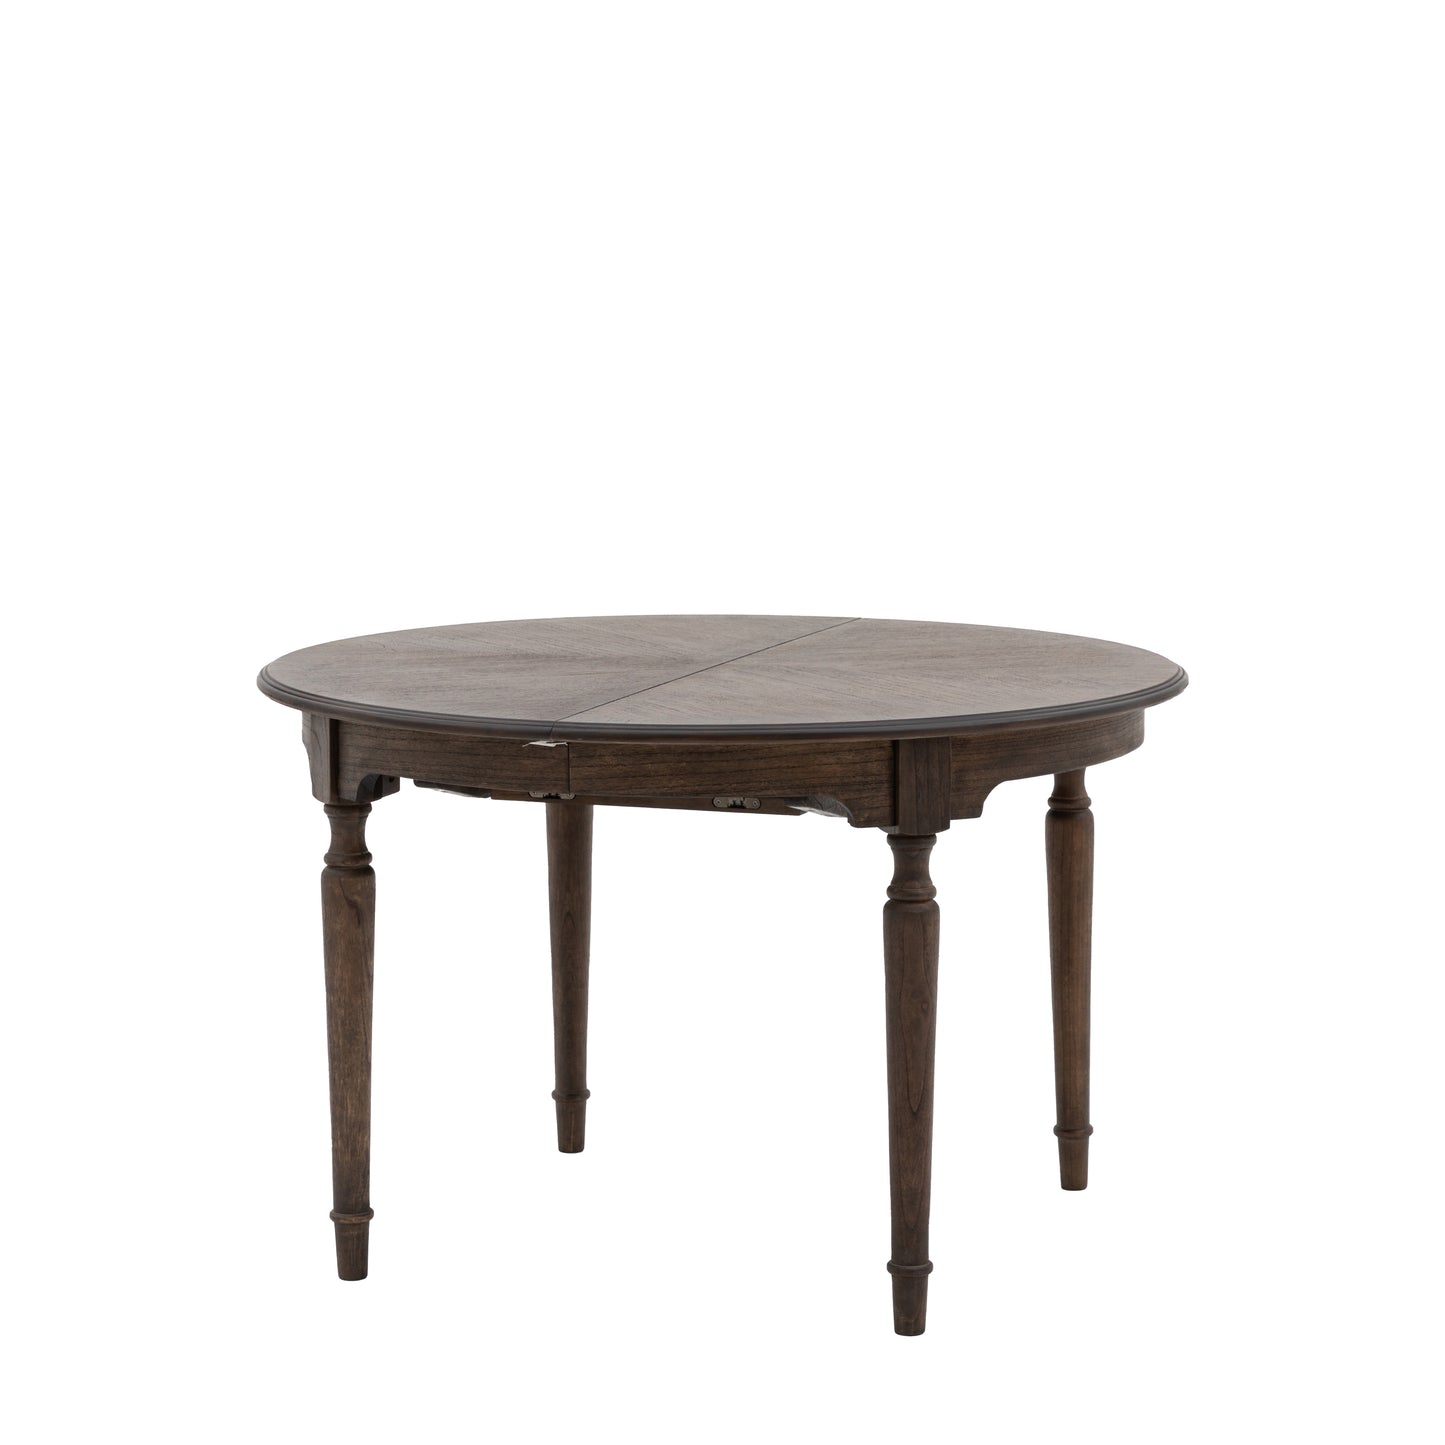 A 1200/1600x1200x750mm wooden-leg Manaton Extending Round Table for interior decor or home furniture from Kikiathome.co.uk.